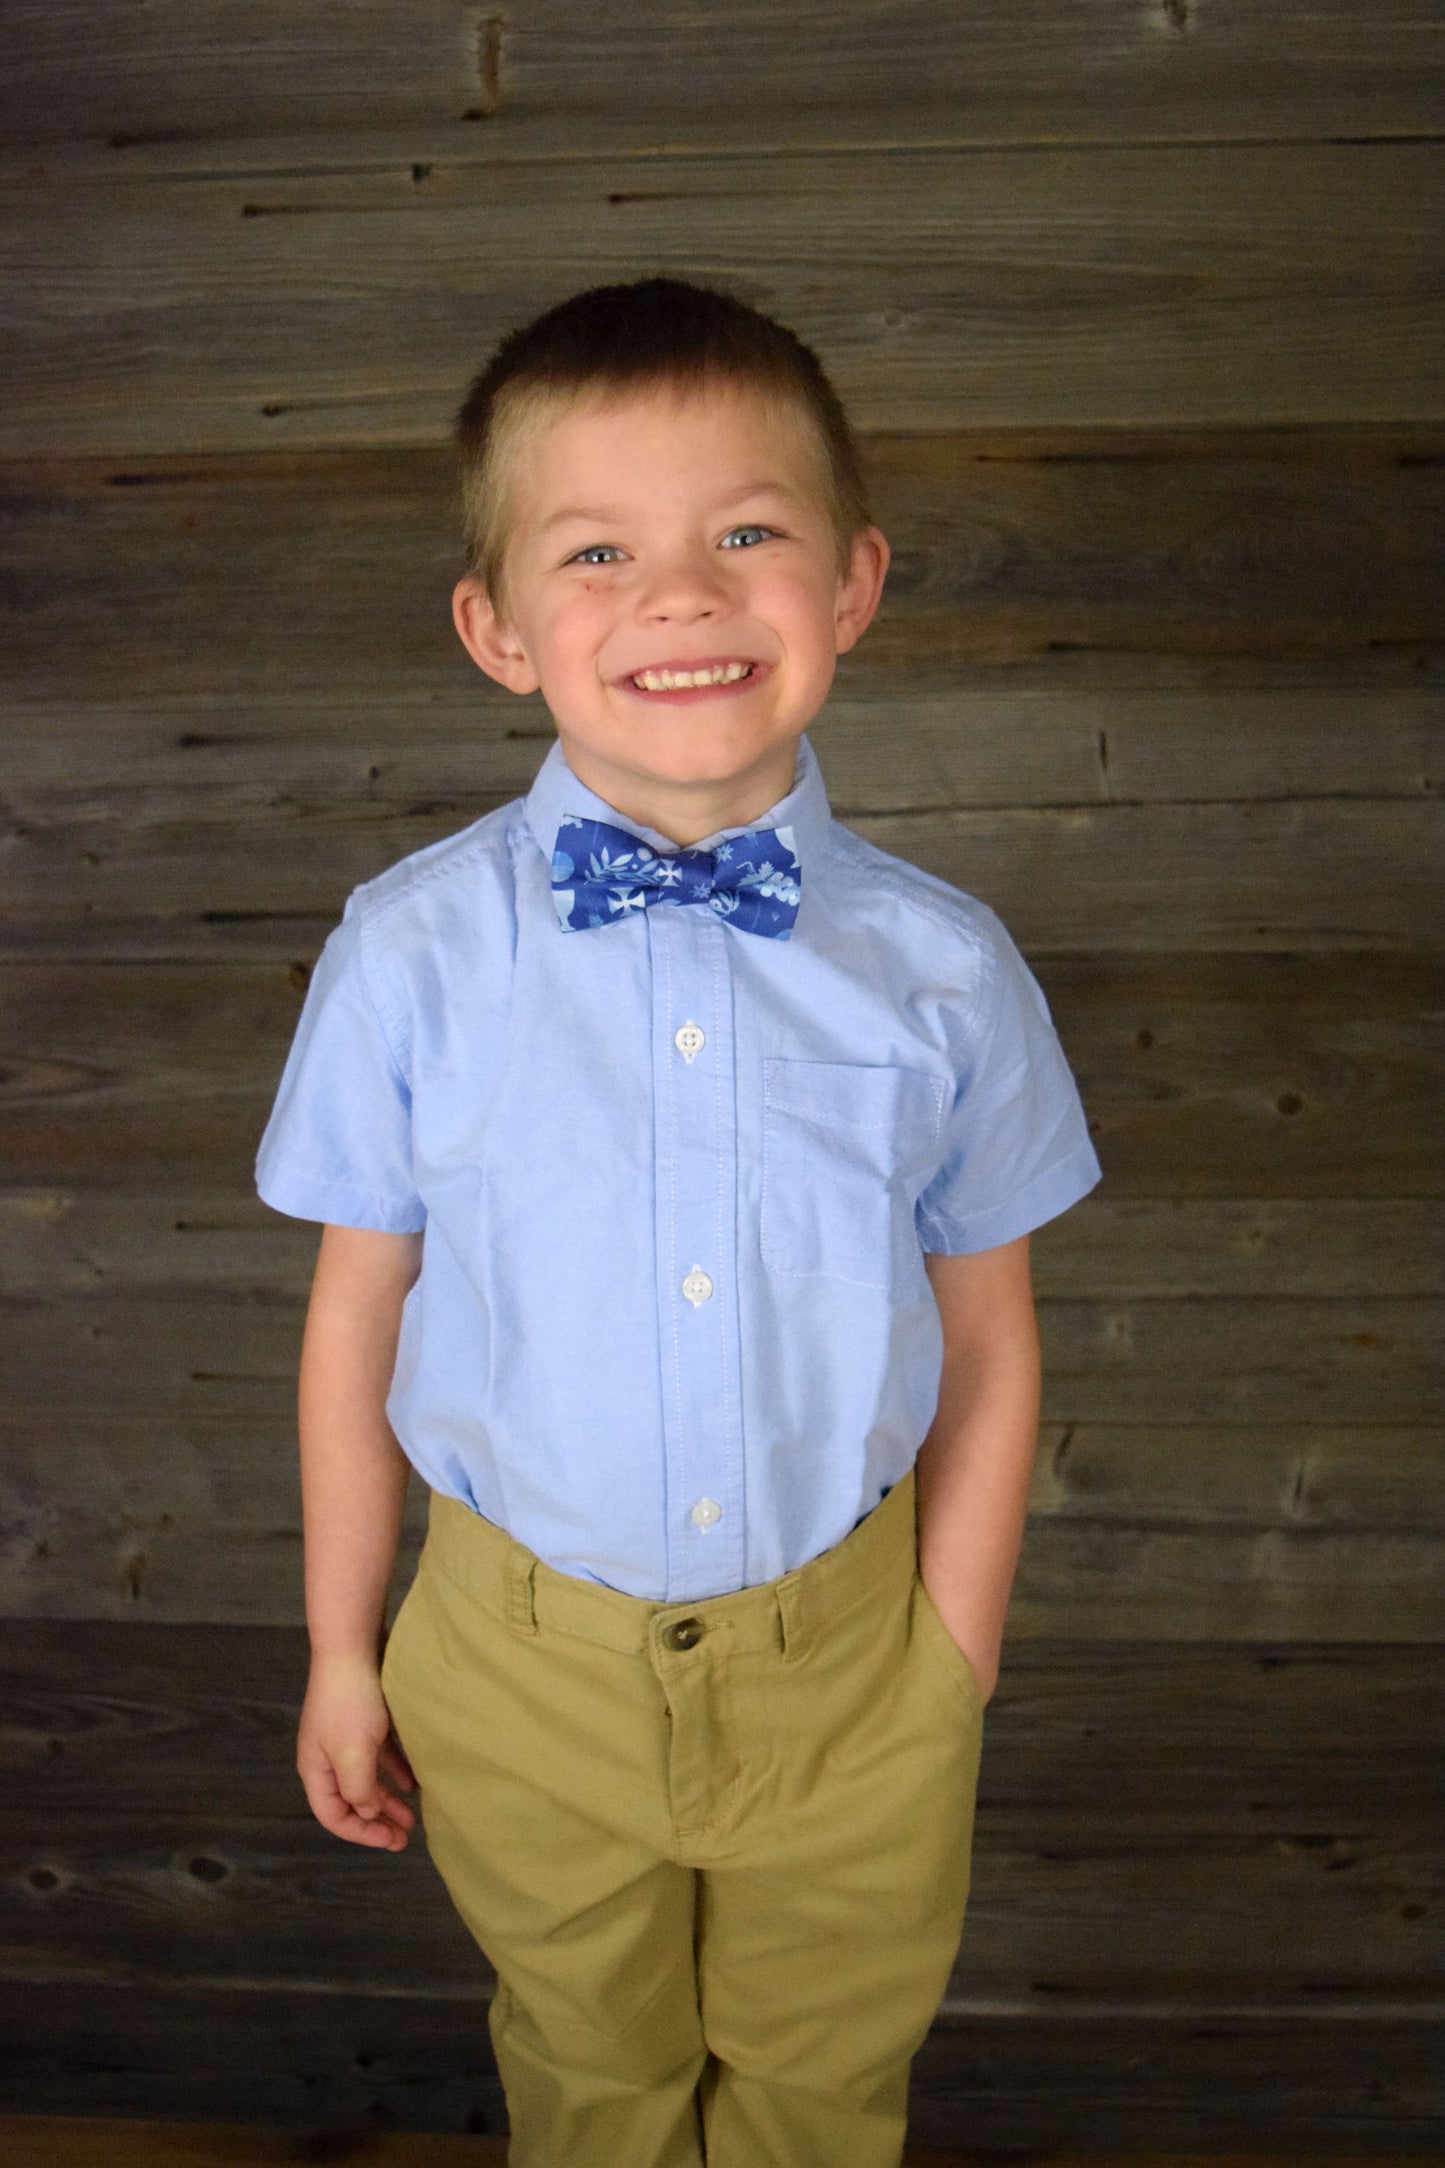 Adjustable Youth 1st Communion Bow Tie